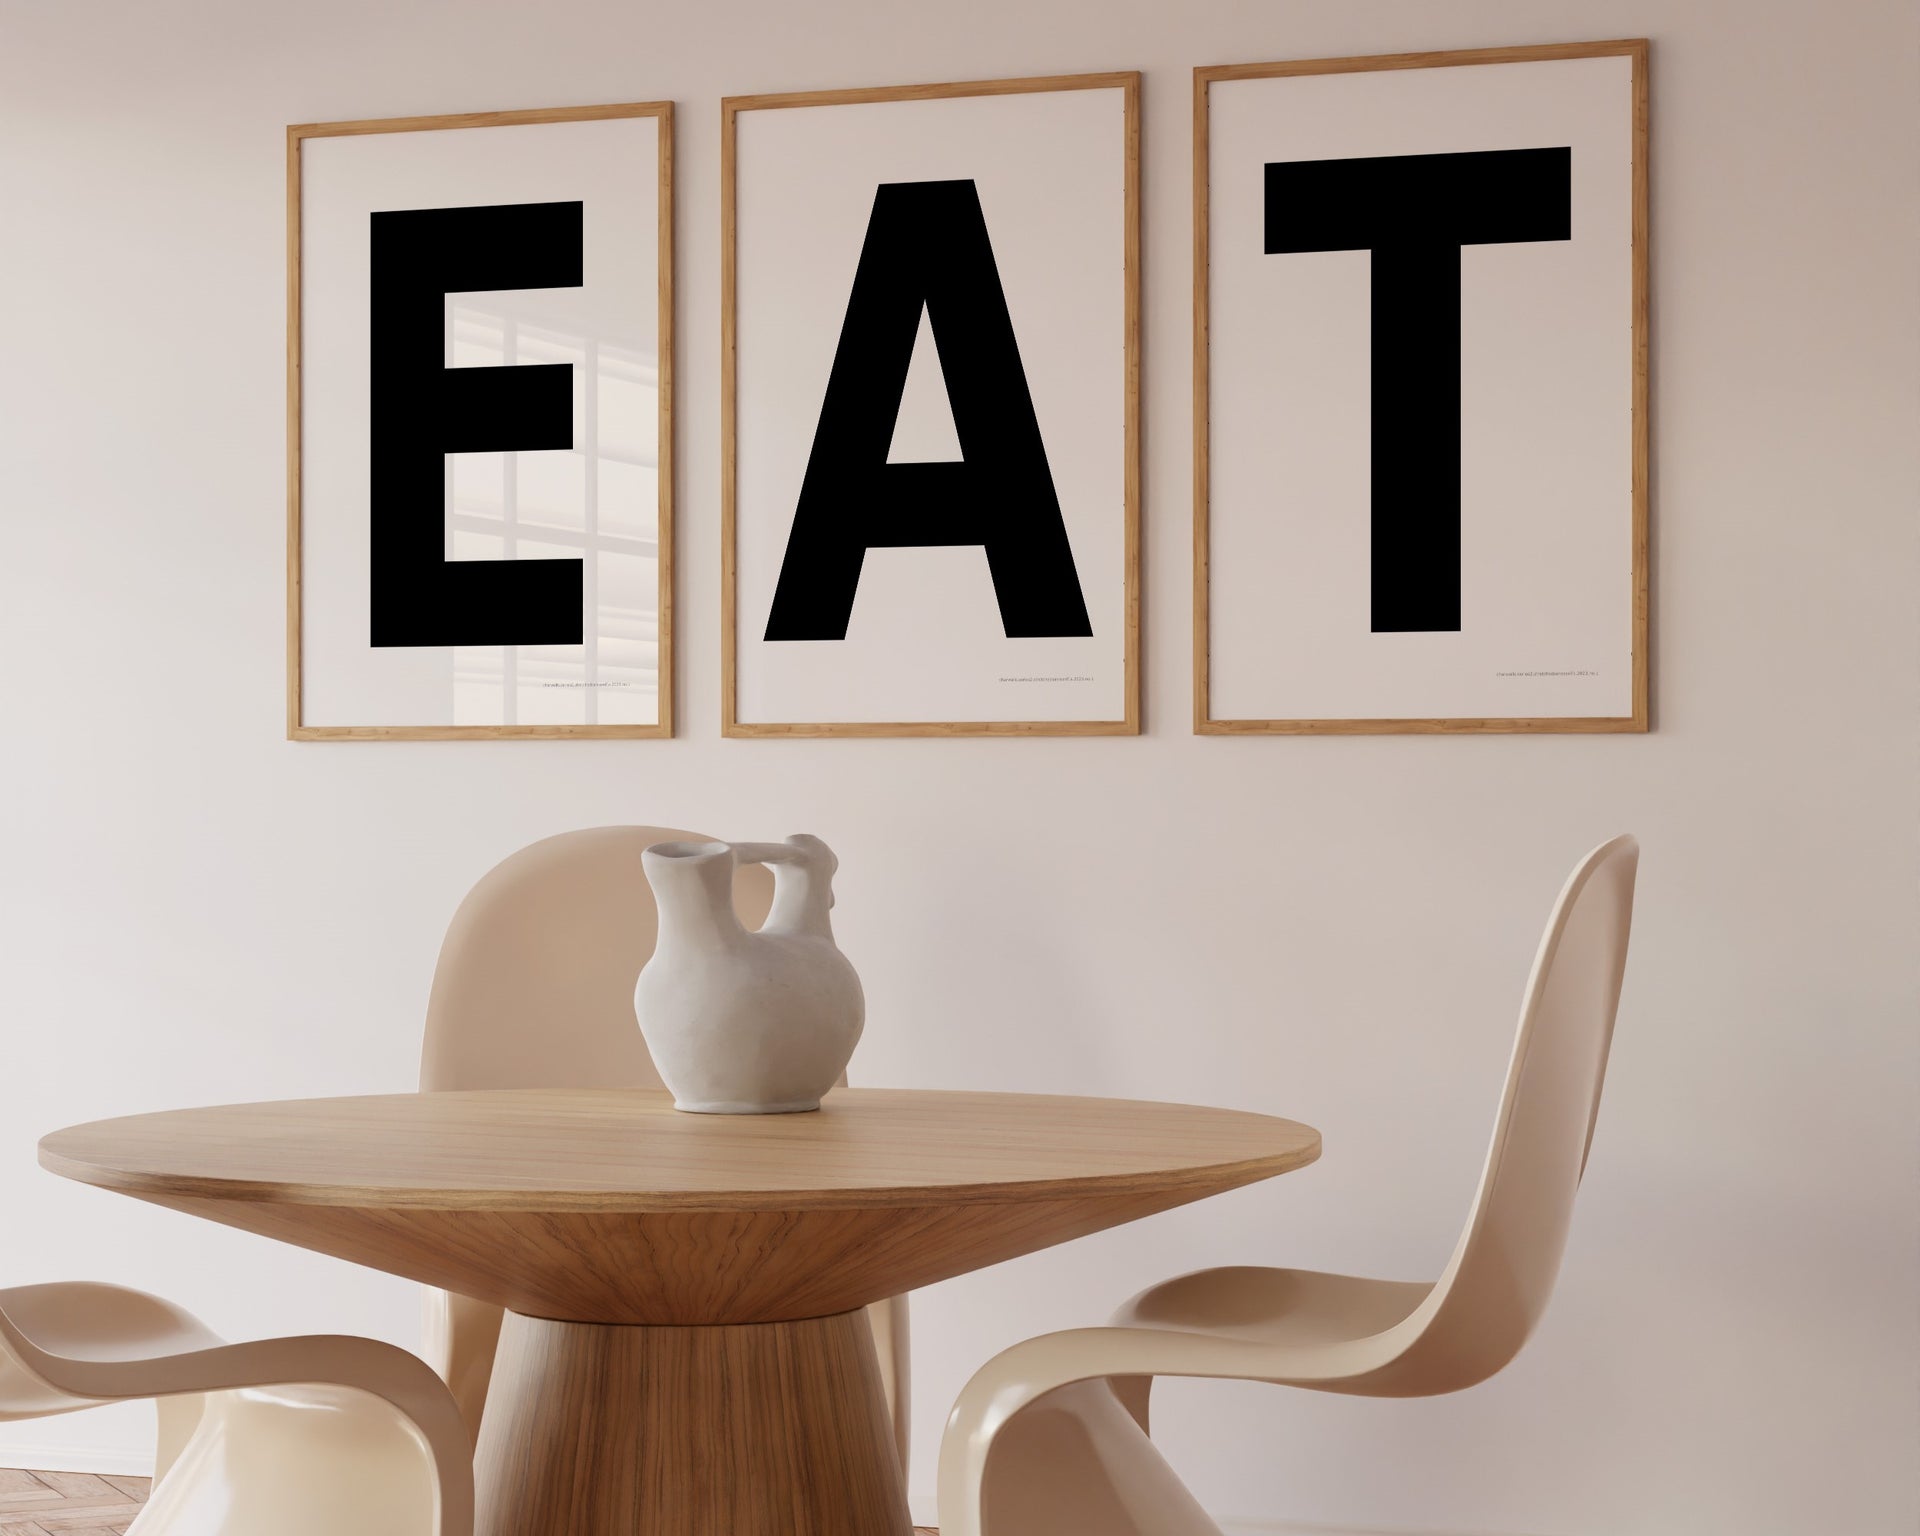 Three framed black and white letter art prints spelling out the word EAT hanging in a modern dining room.